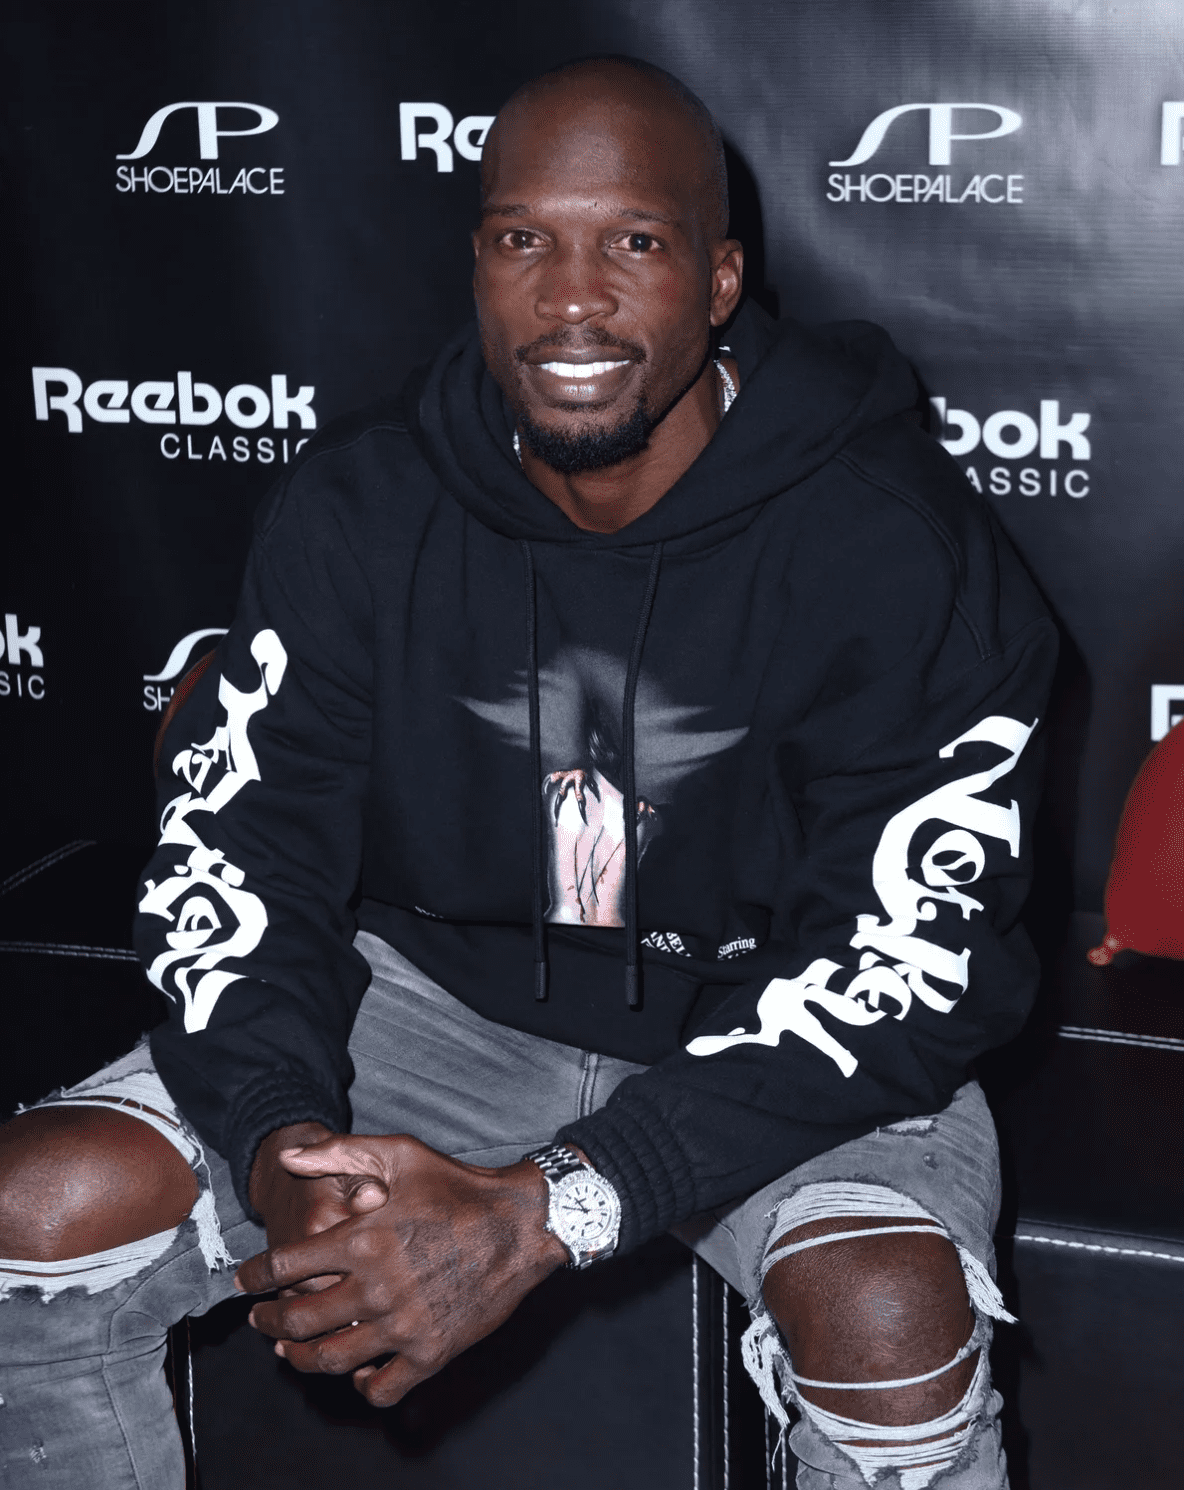 Chad Ochocinco attends the Reebok Classic x Amber Rose launch event at Shoe Palace on September 30, 2017 in Los Angeles, California. | Source: Getty Images